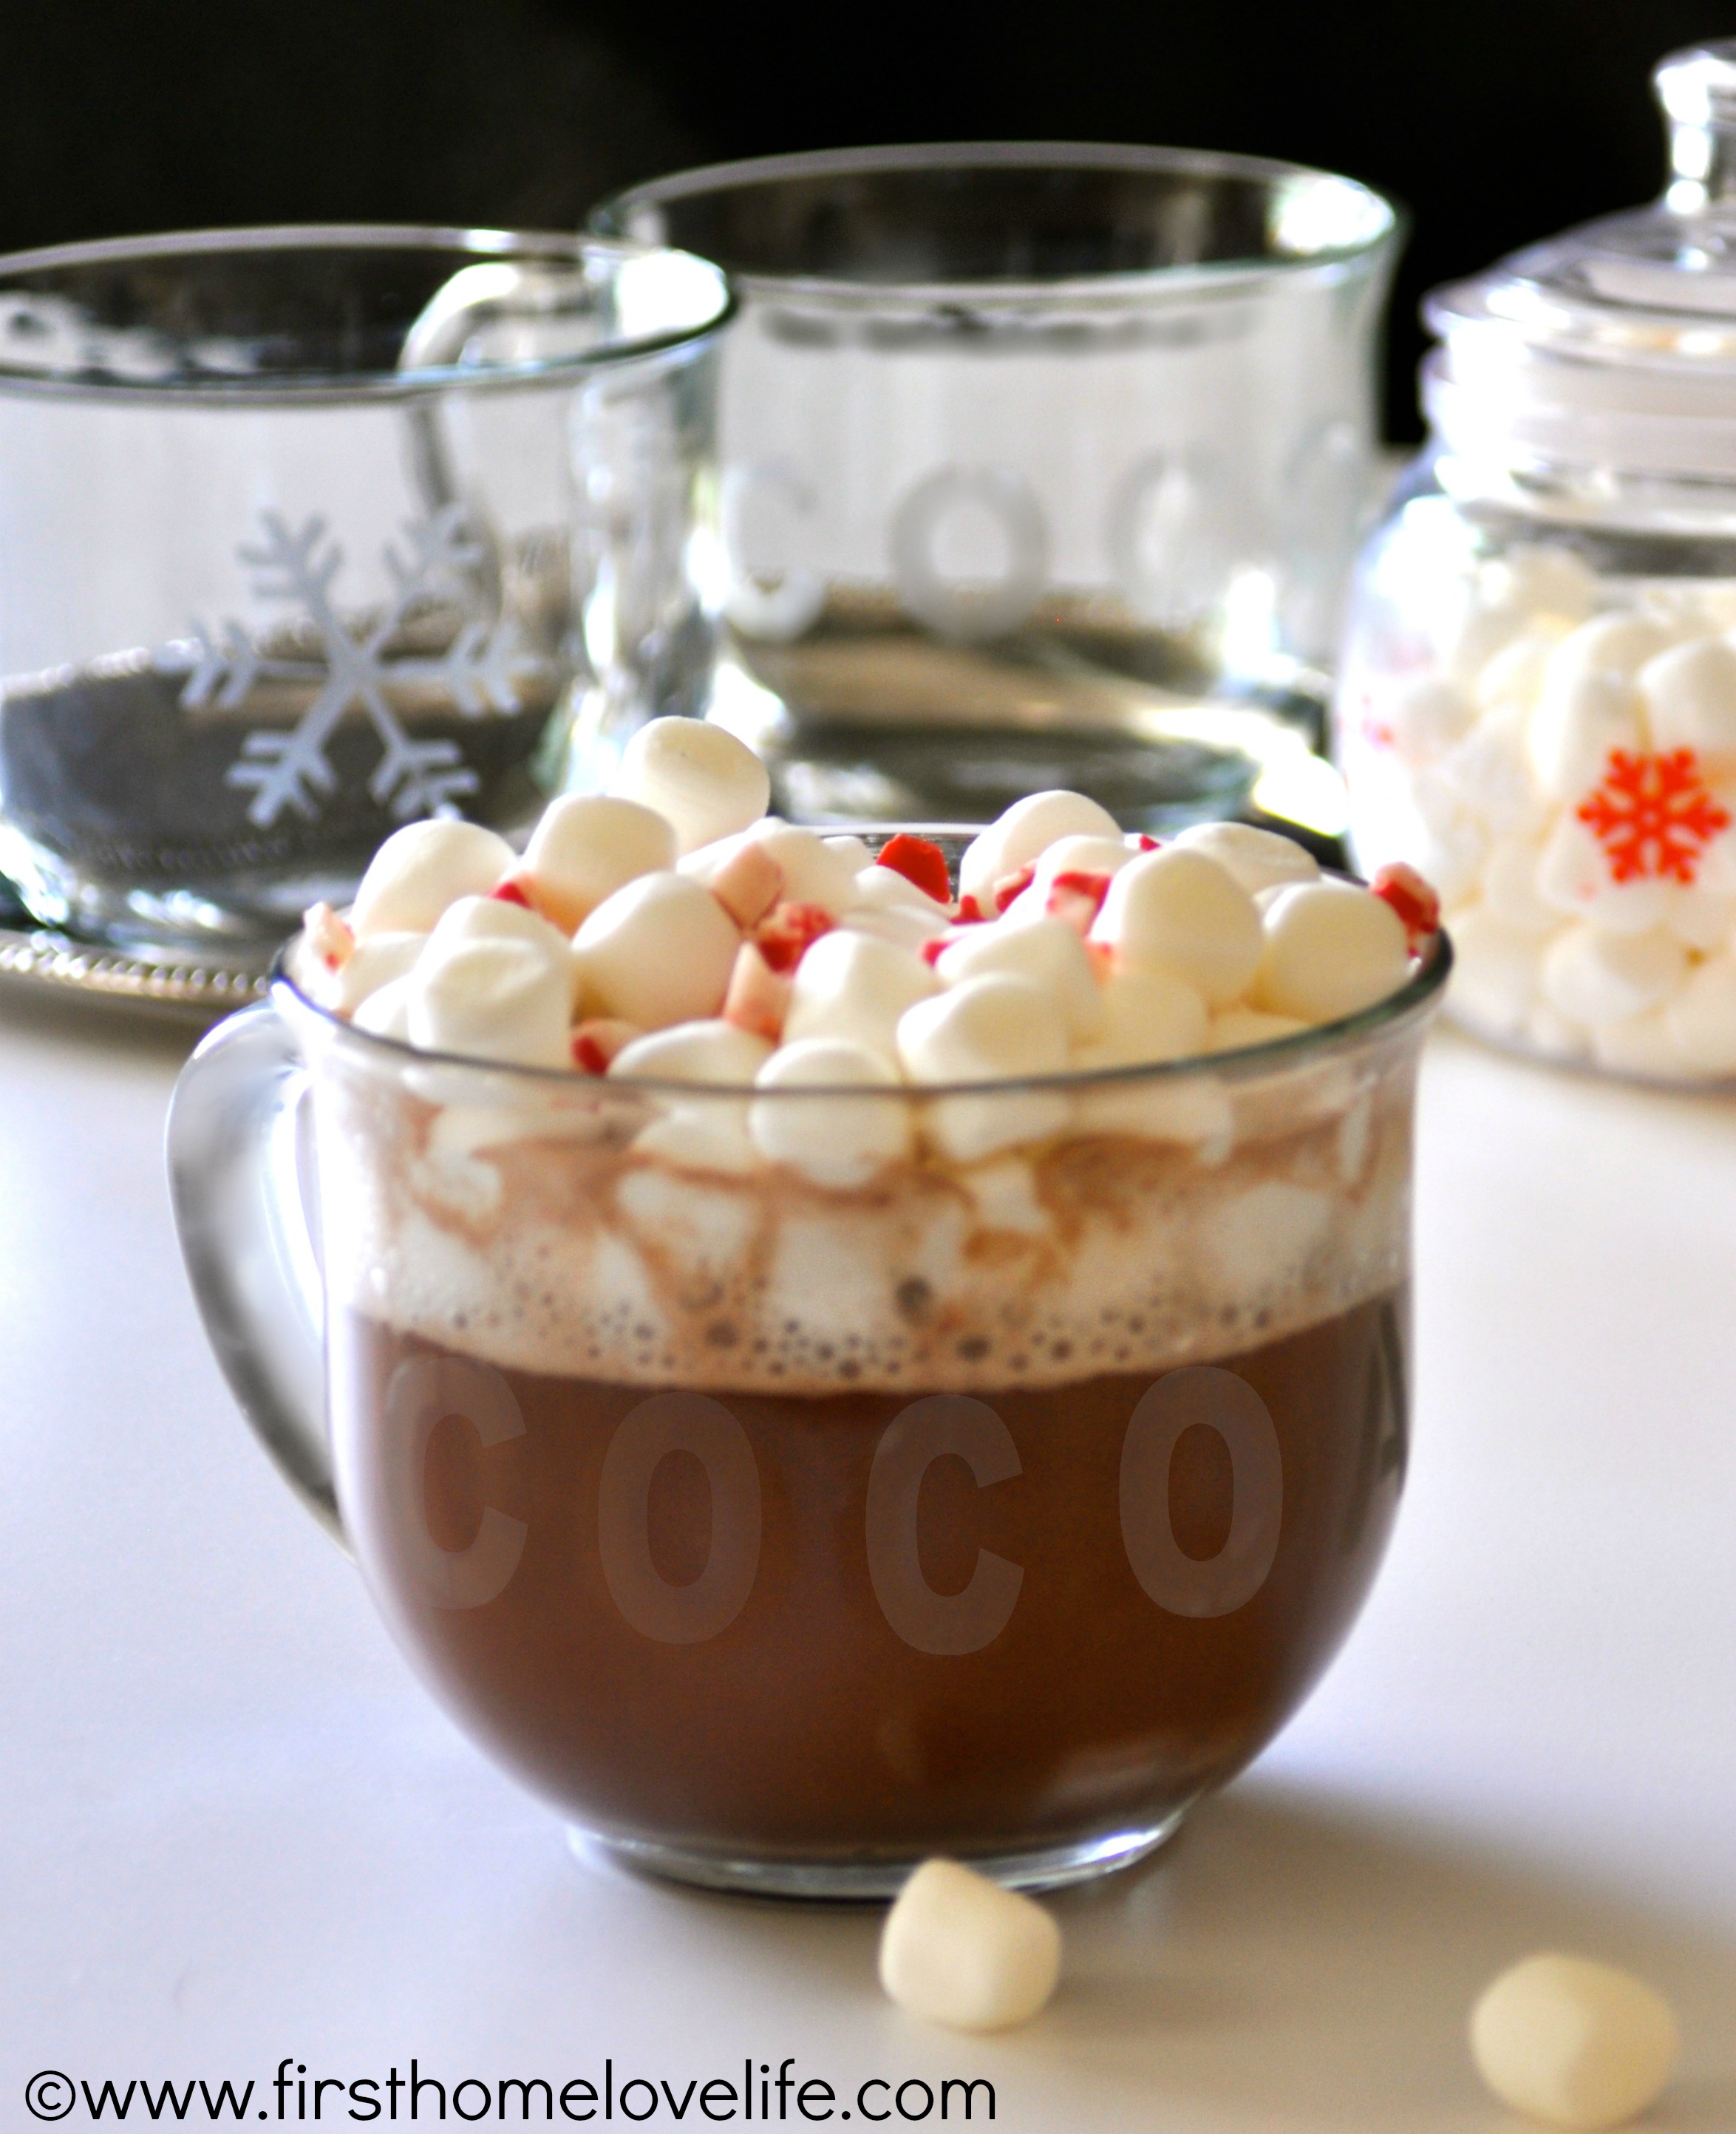 https://www.firsthomelovelife.com/wp-content/uploads/2013/11/Hot_Cocoa_Cover.jpg